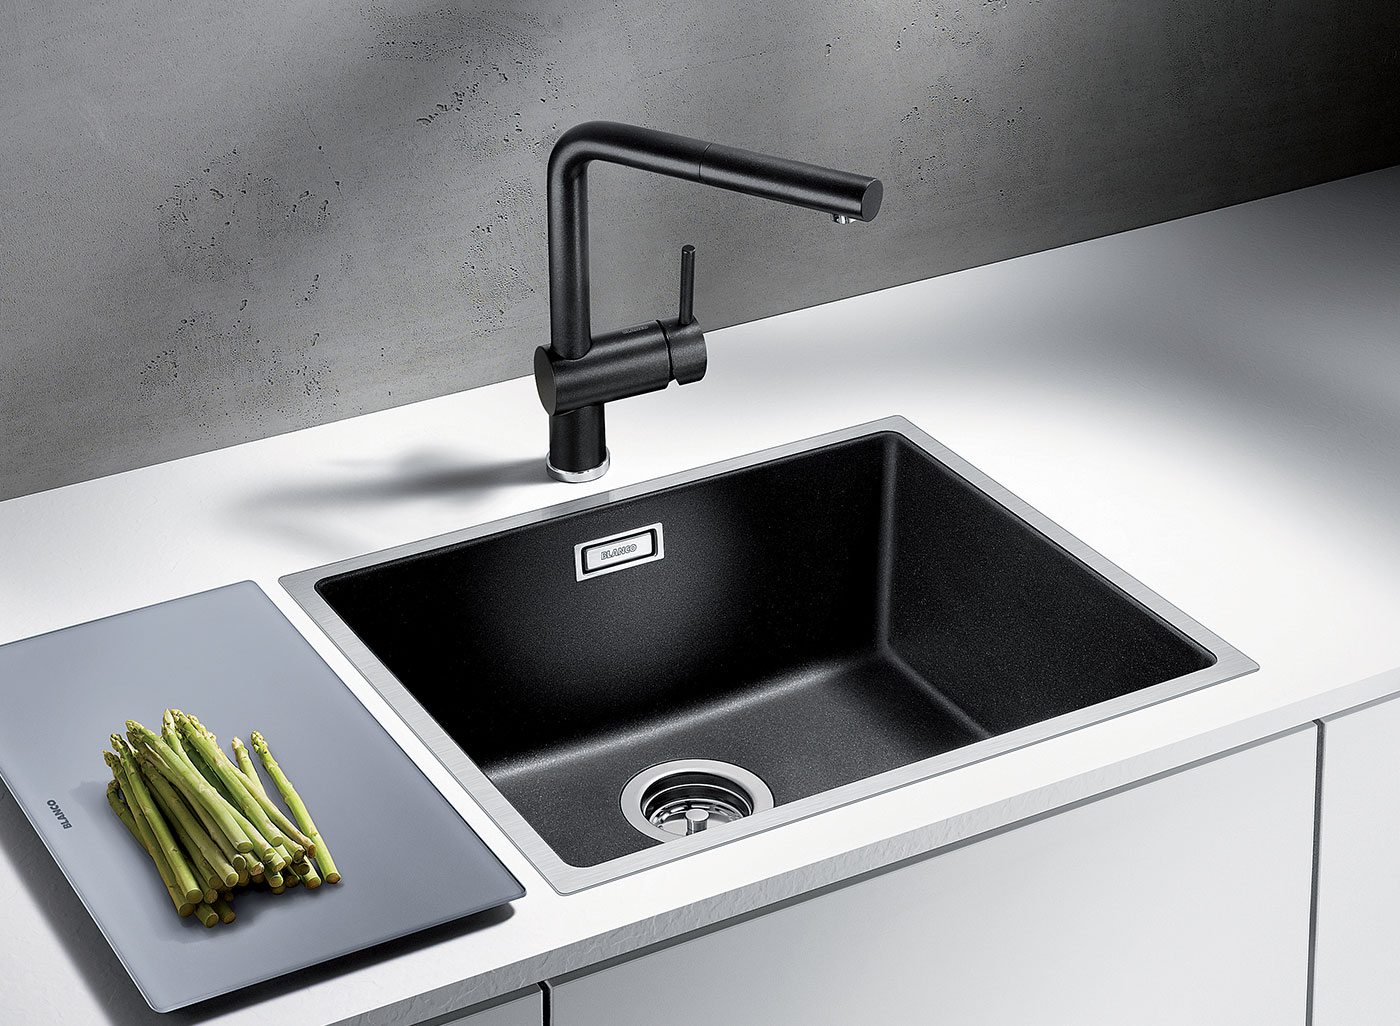 or flush mounted into stone and glass. It's a great match for high quality induction and ceramic cooktops and features an integrated overflow.